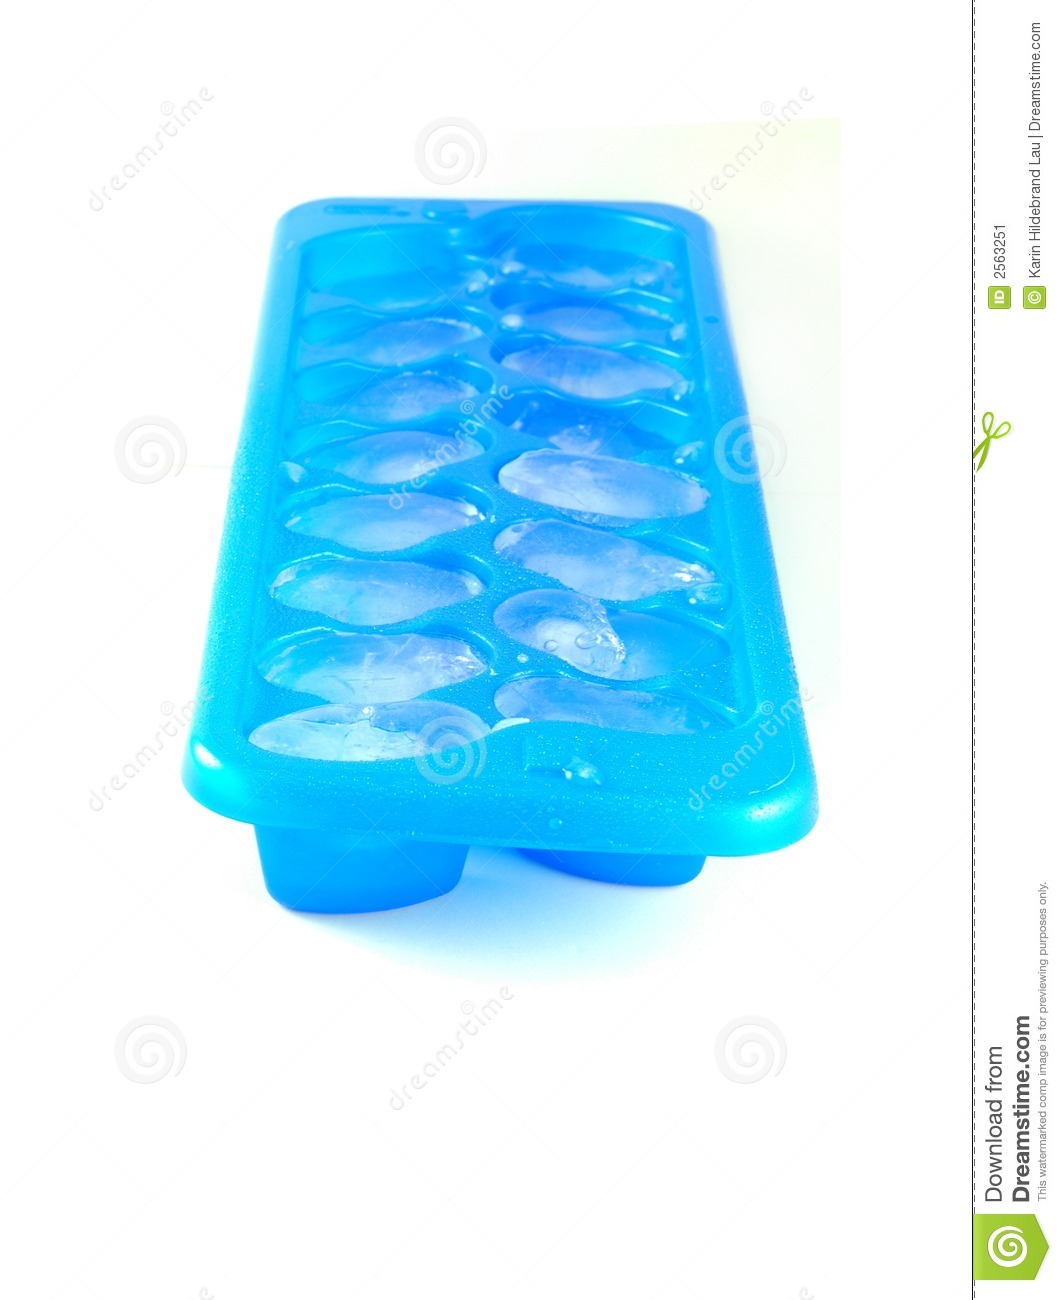 Closeup Of Frozen Ice Cubes In A Tray